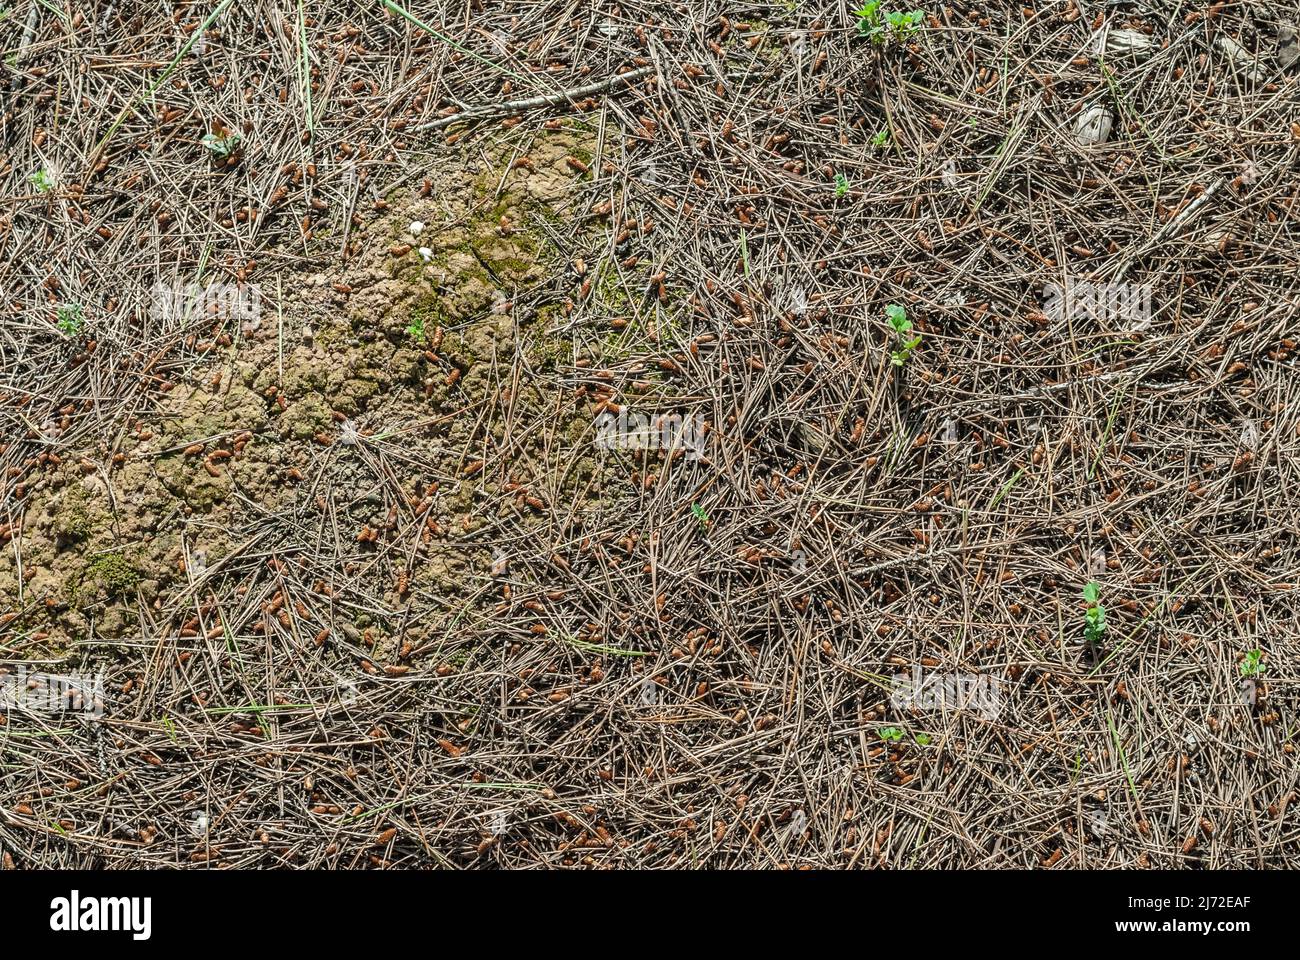 Soil soil with pine thorns textural and background concept Stock Photo ...